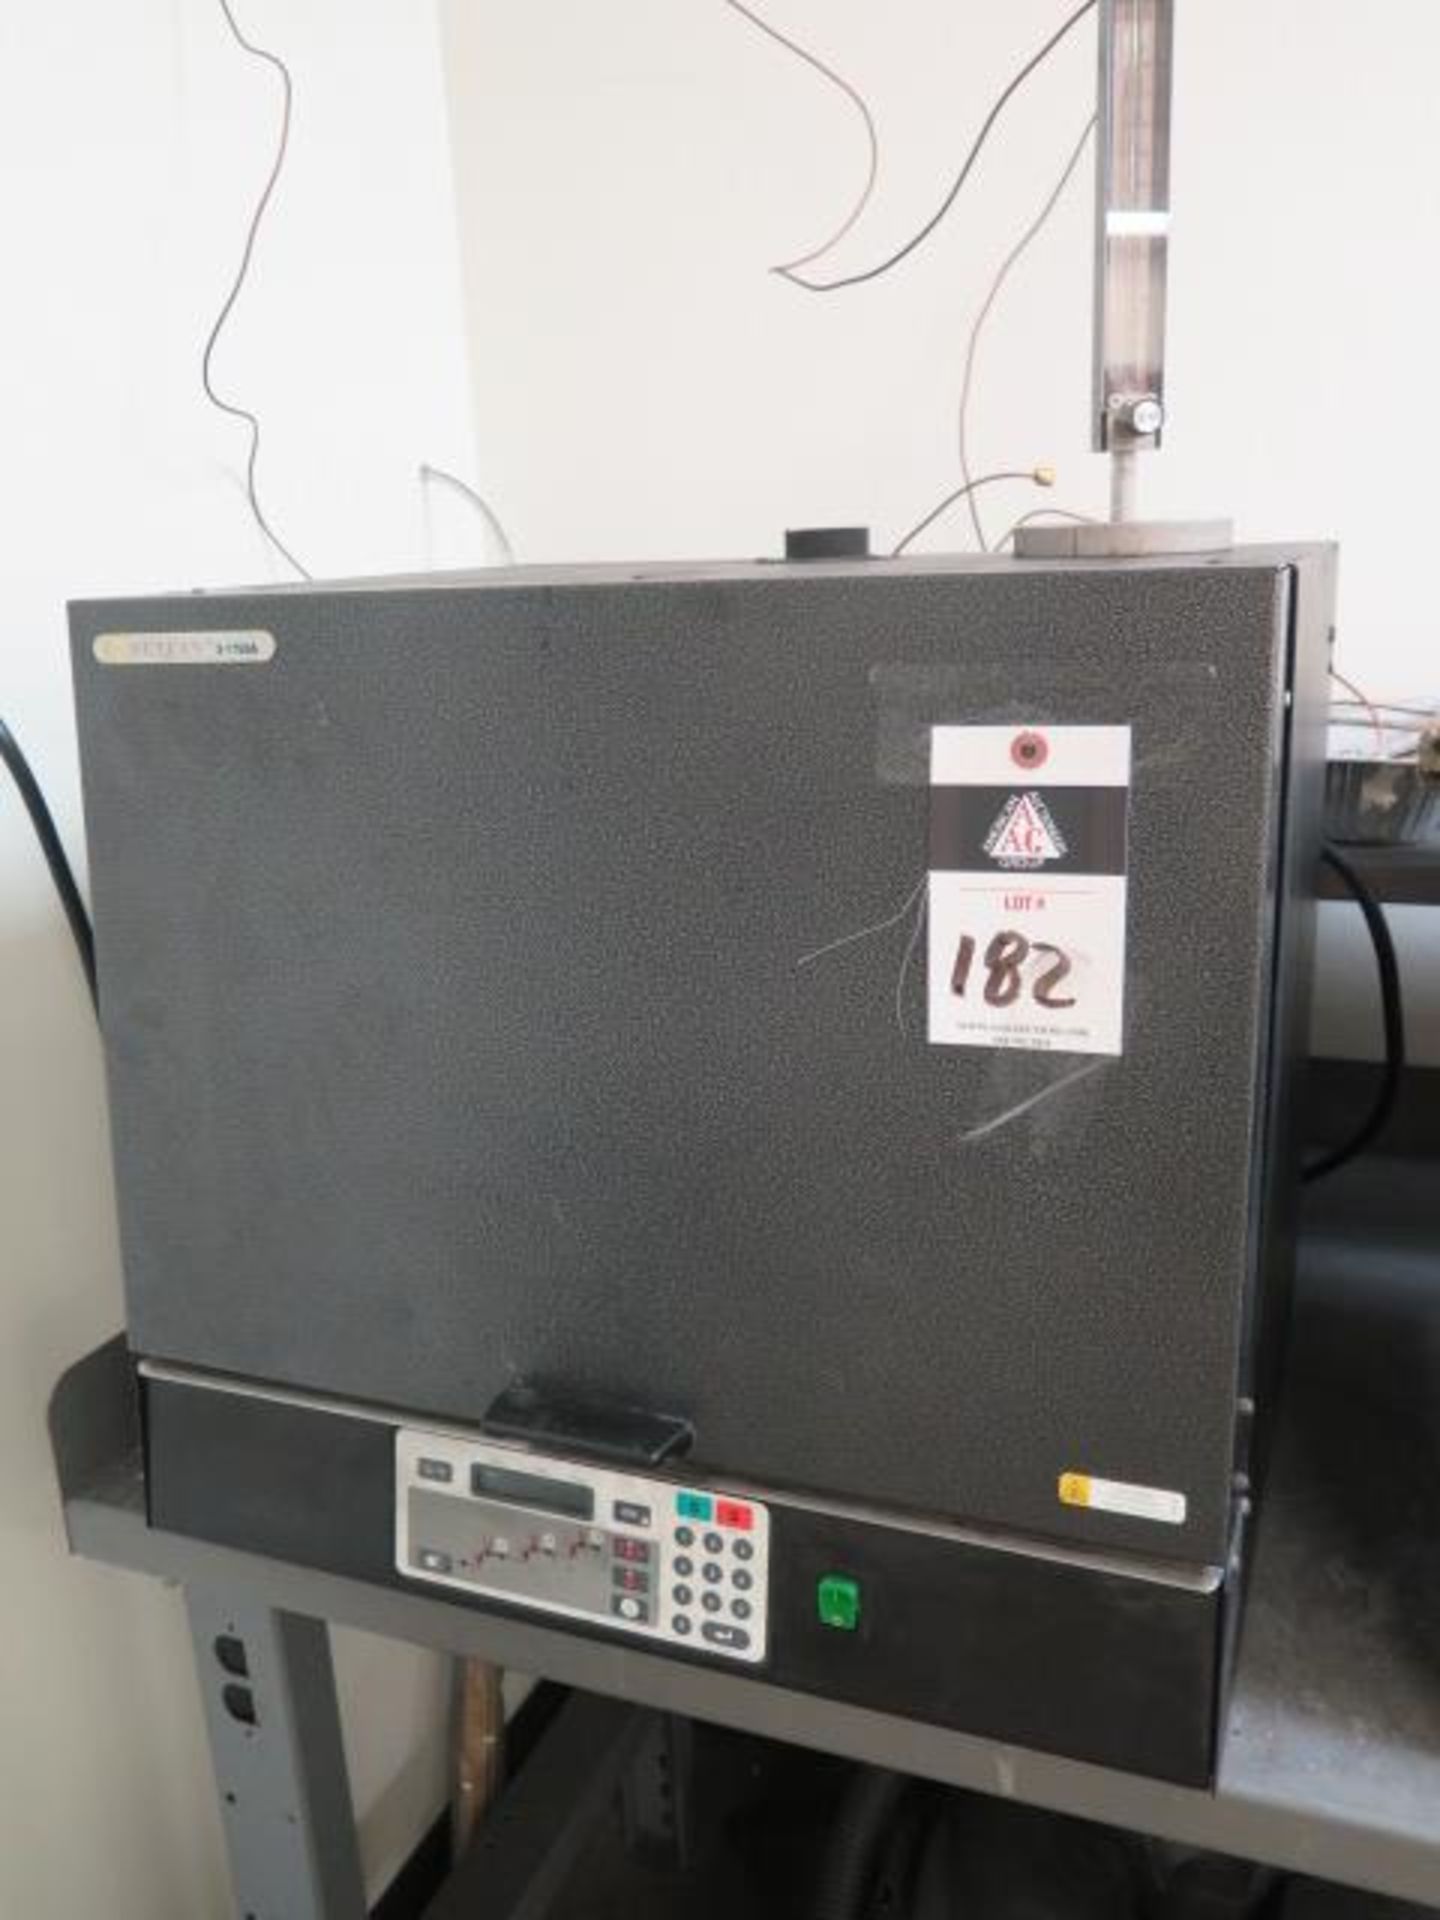 Vulcan mdl. 3-1750A 1100 Deg C / 2012 Deg F Electric Furnace, SOLD AS IS AND WITH NO WARRANTY